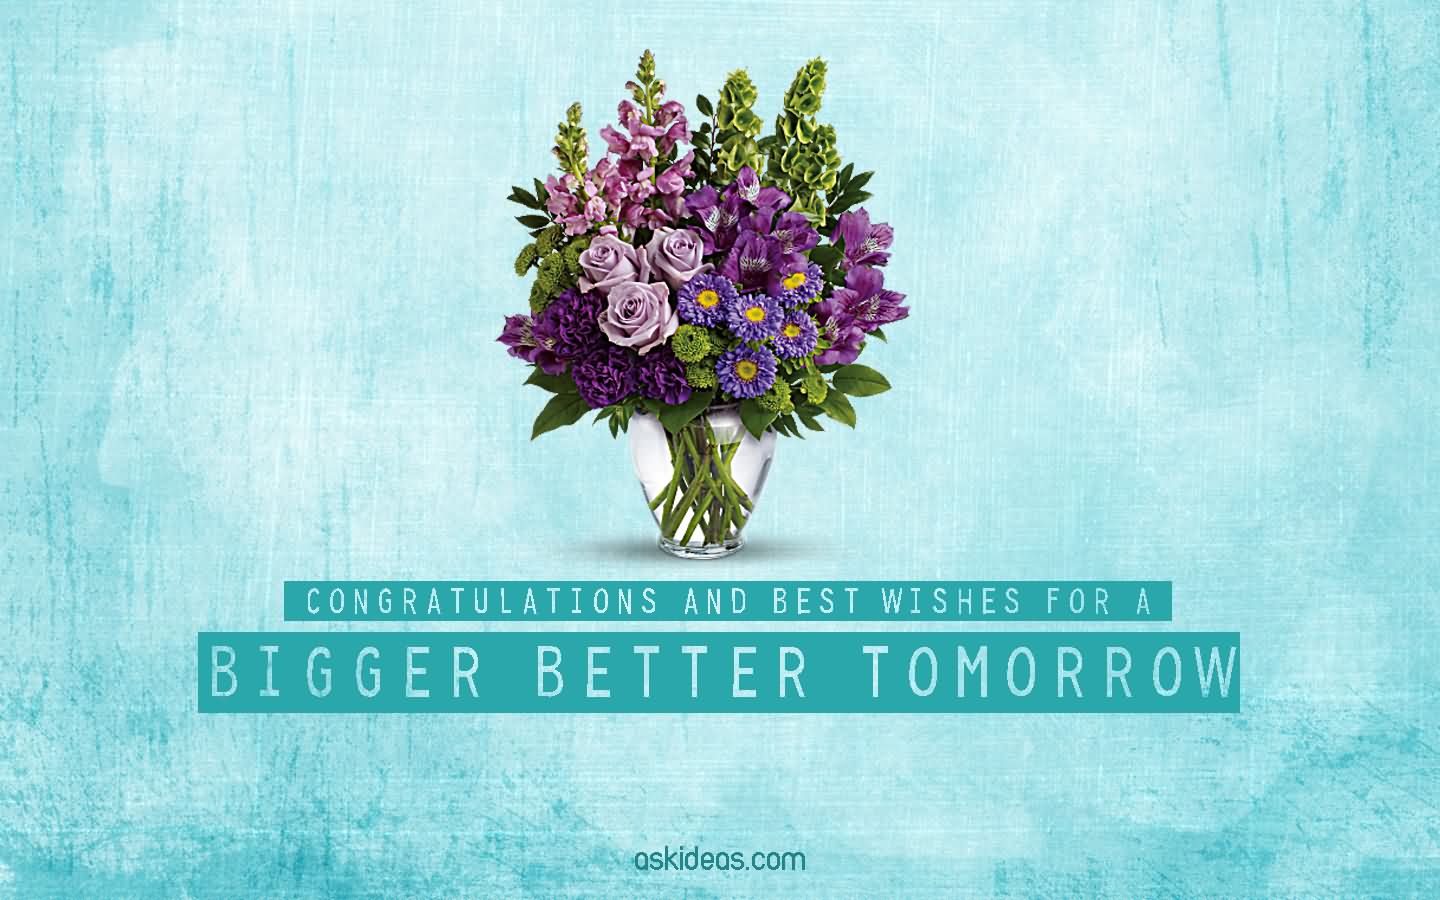 Congratulations and best wishes for a bigger, better tomorrow.